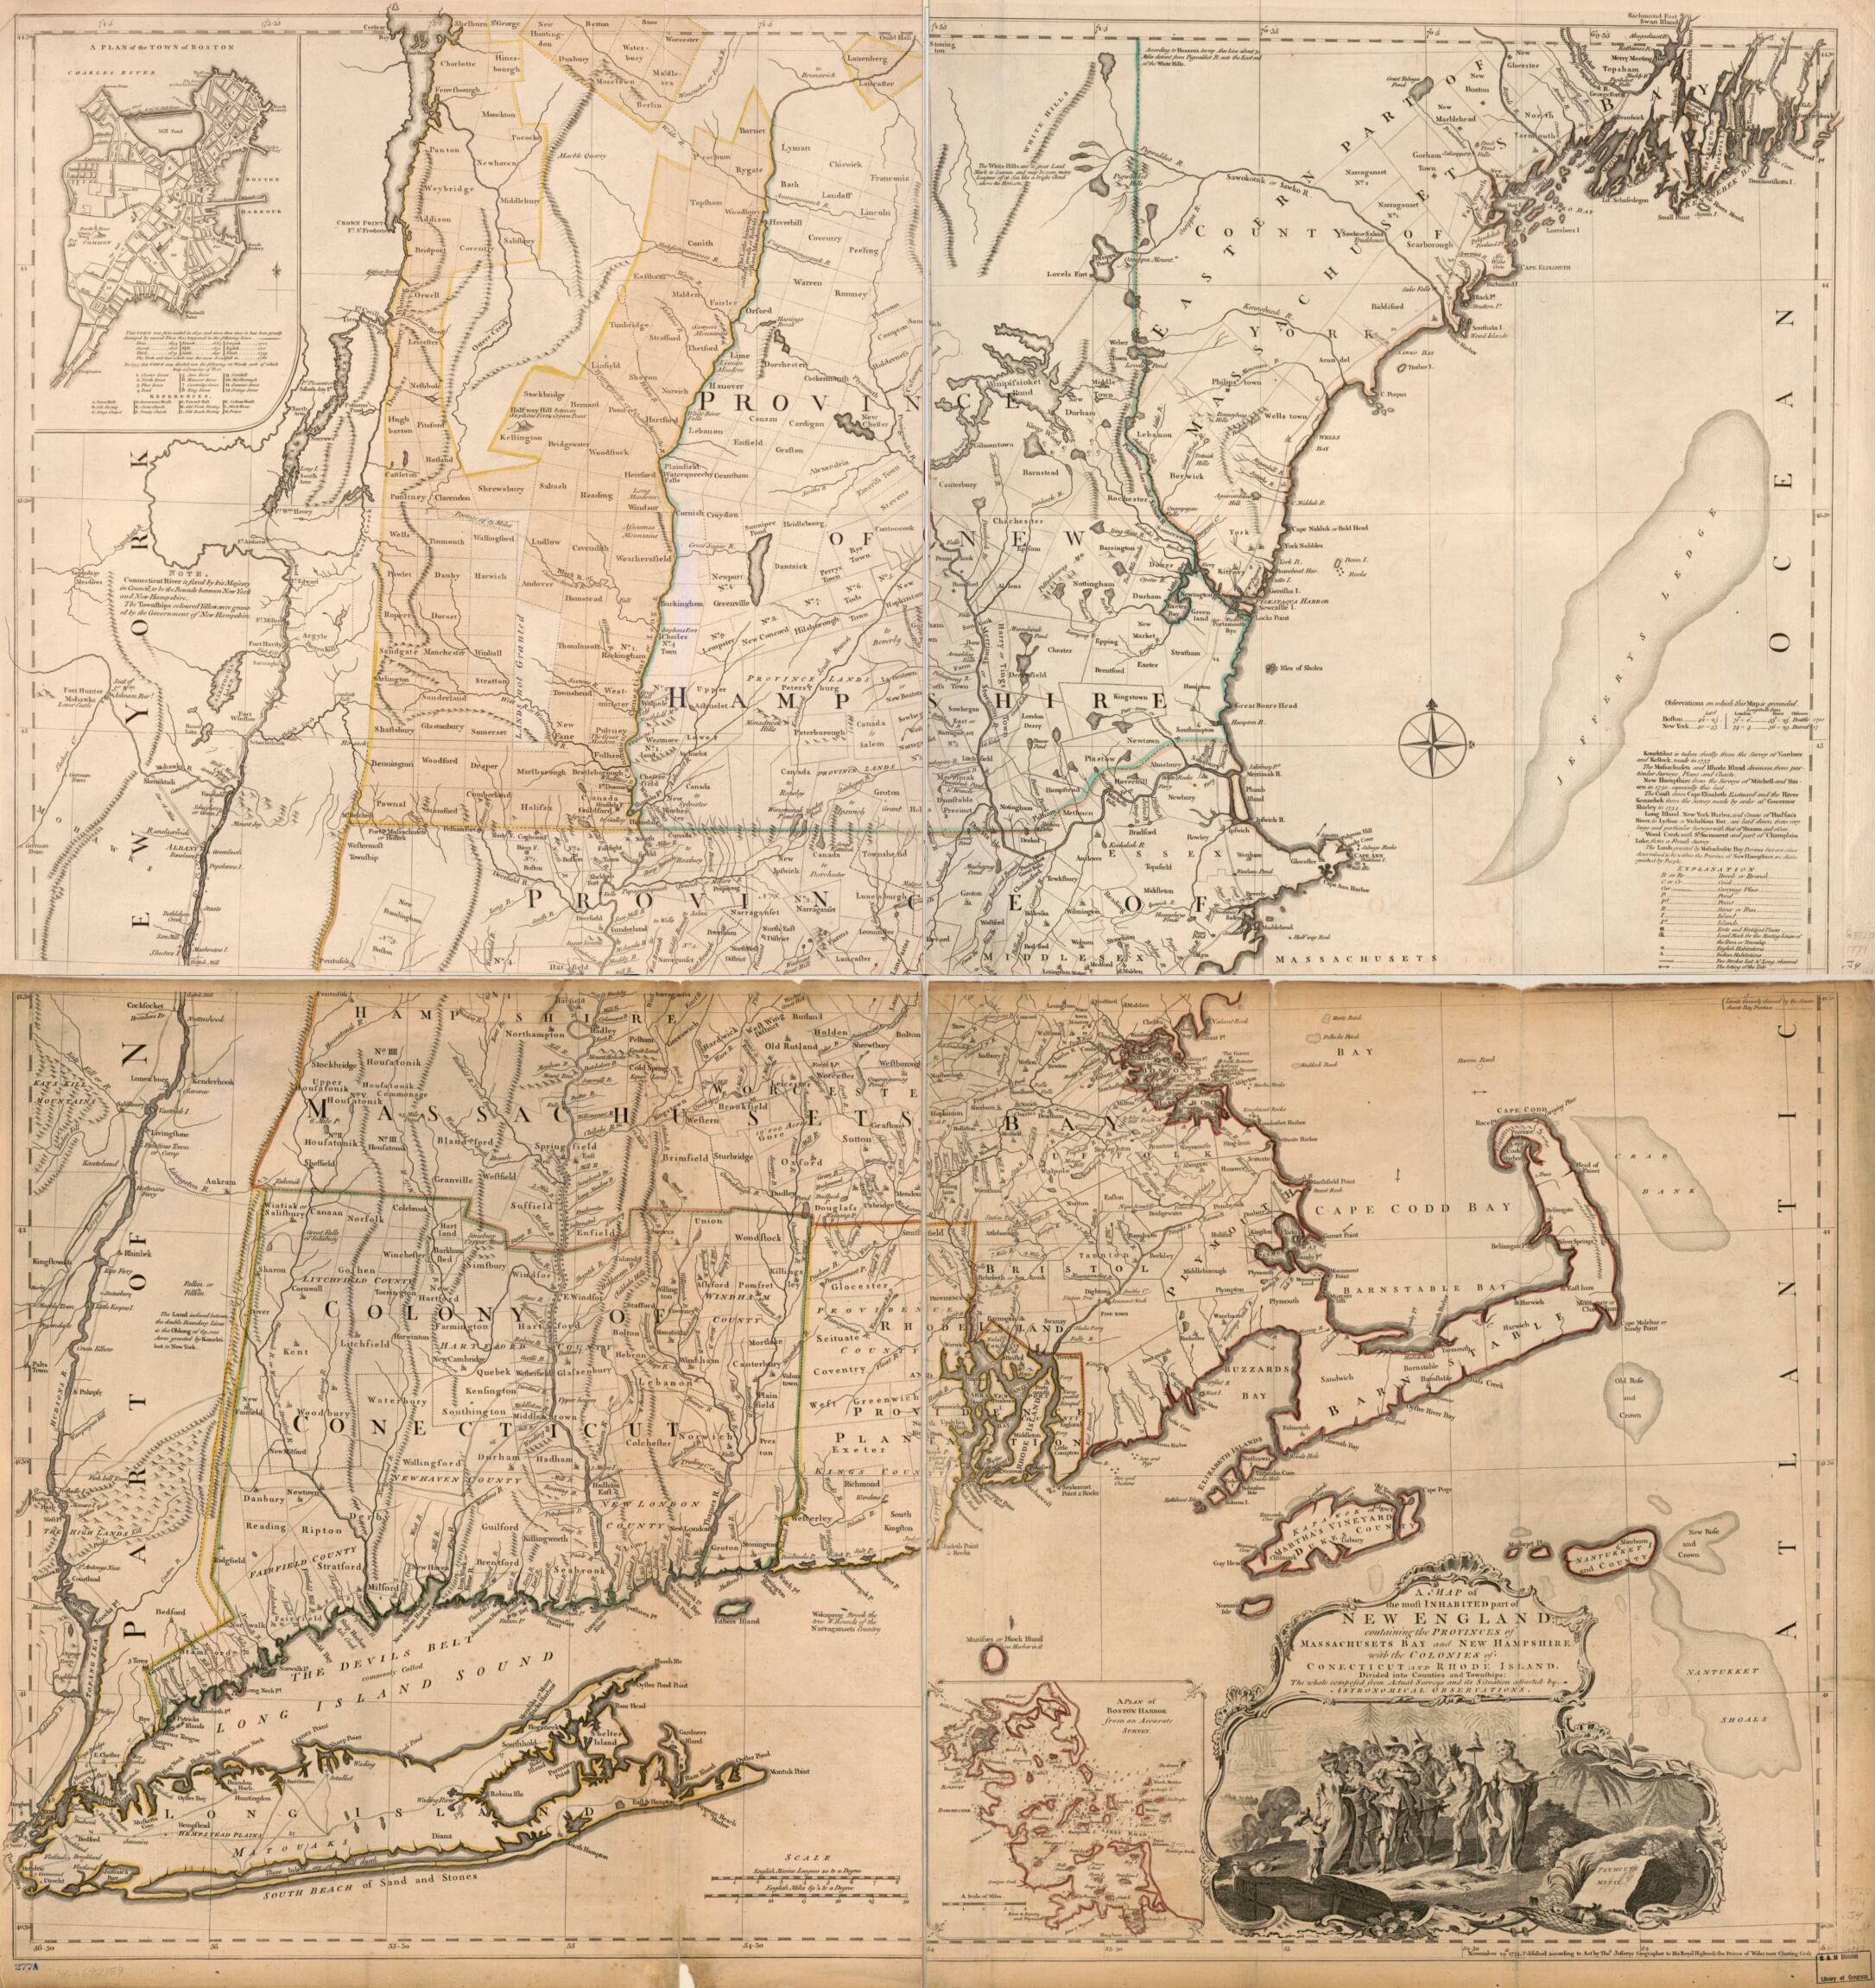 This old map of A Map of the Most Inhabited Part of New England, Containing the Provinces of Massachusets Bay and New Hampshire, With the Colonies of Conecticut and Rhode Island, Divided Into Counties and Townships: the Whole Composed from Actual Surveys